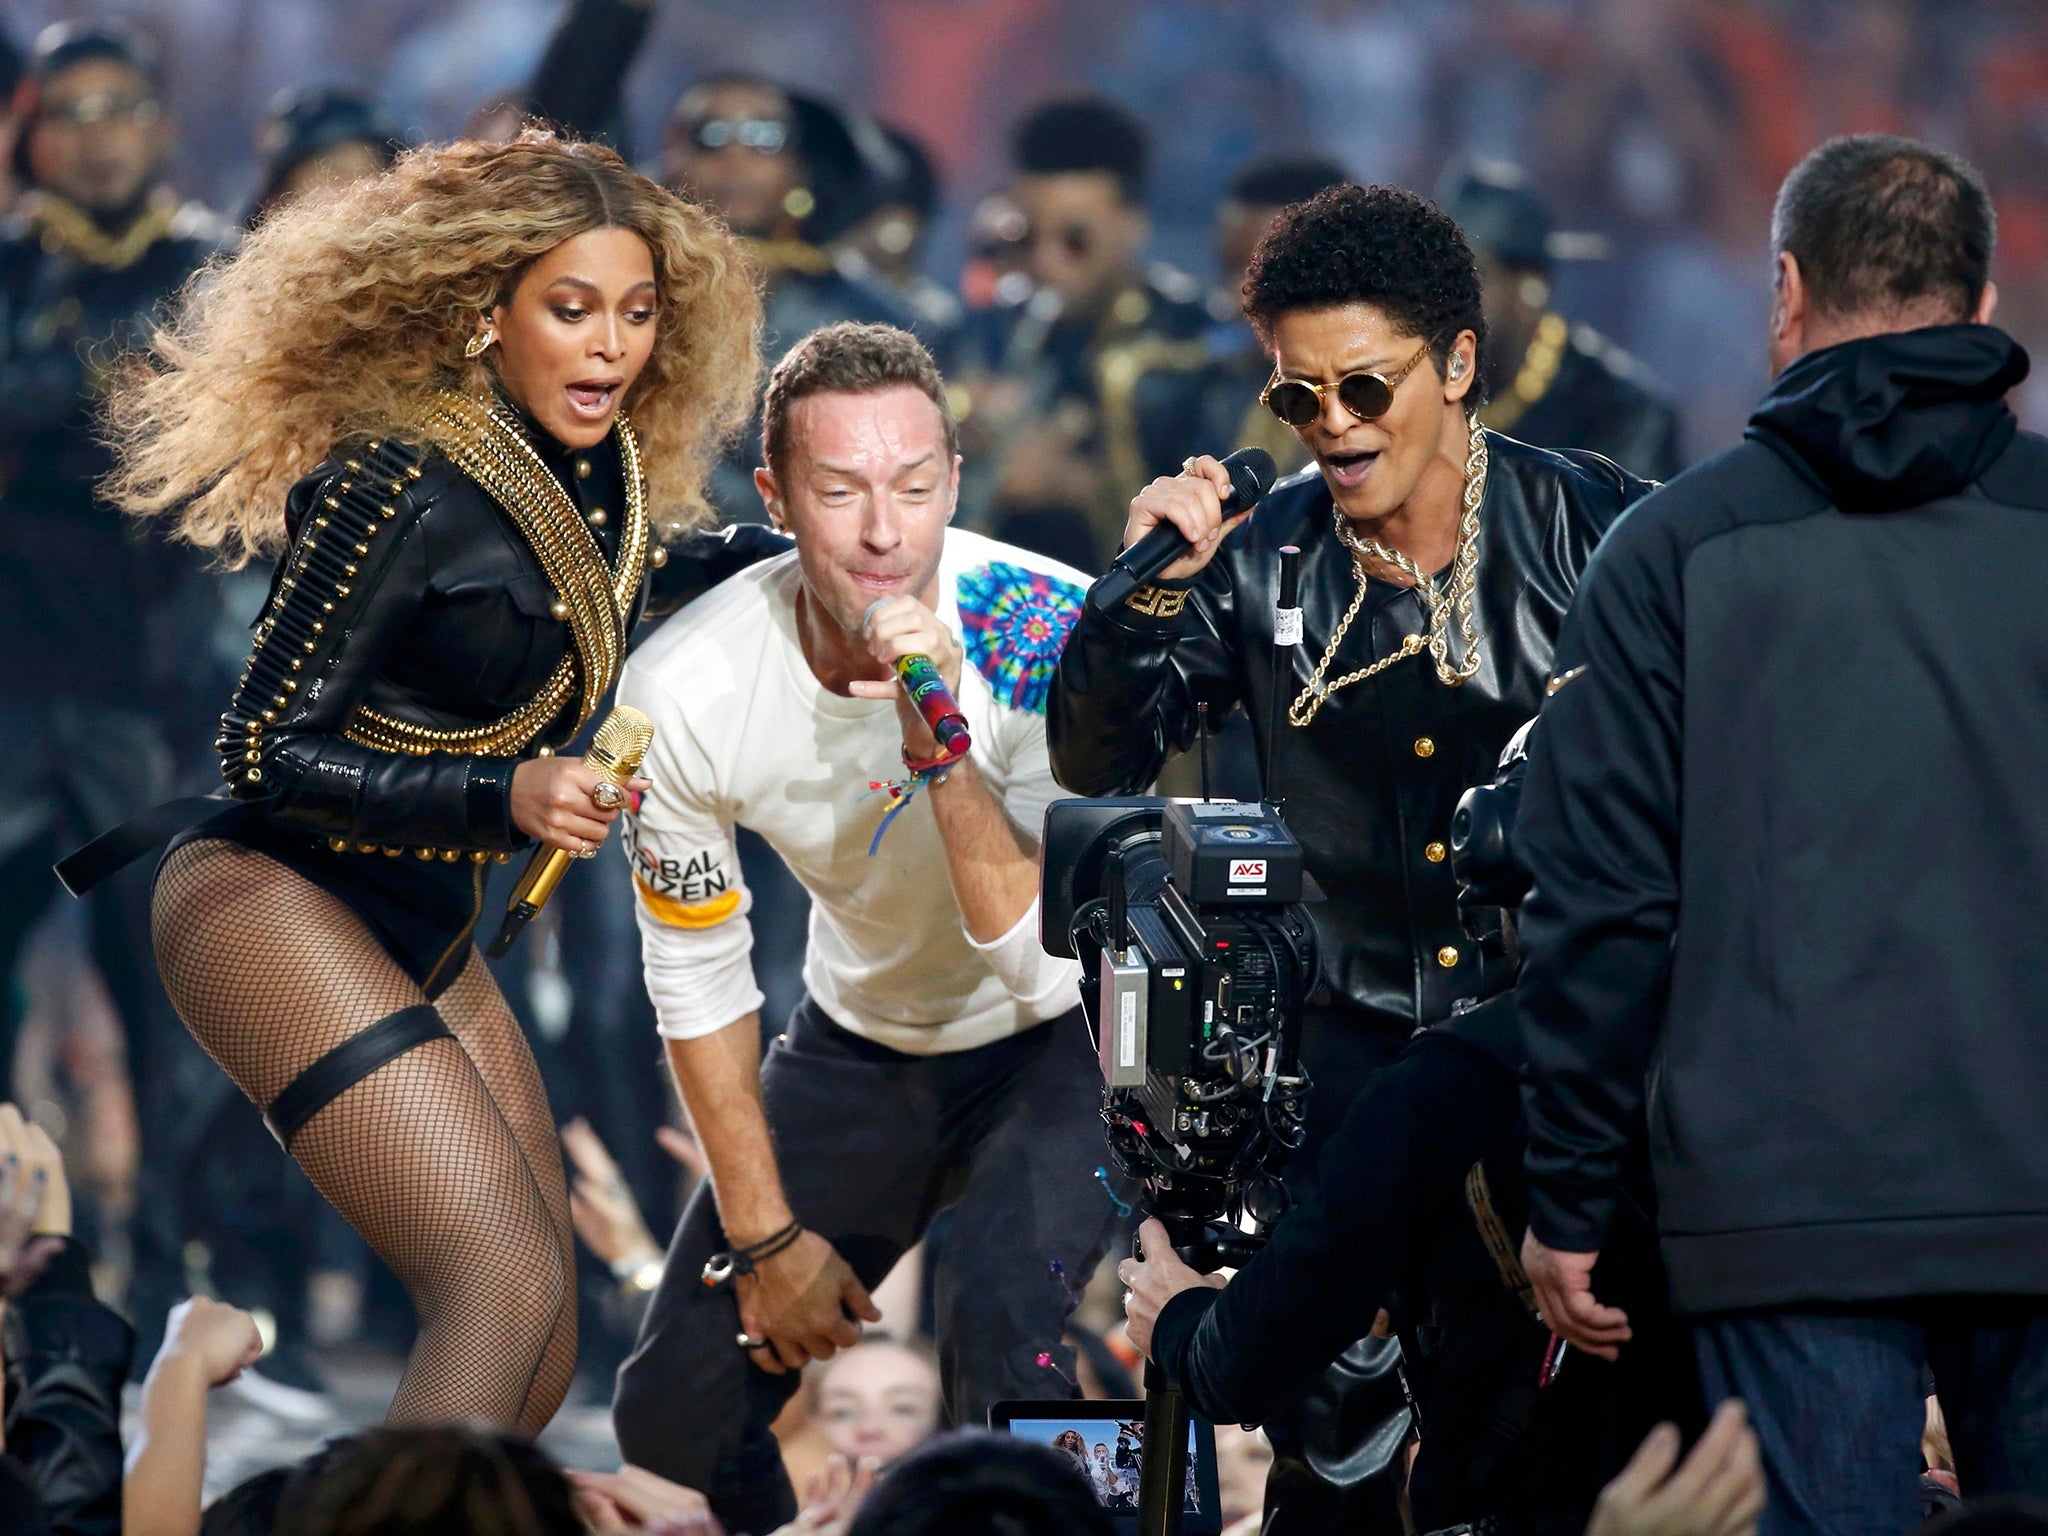 Beyonce (L), Chris Martin (C) and Bruno Mars perform during the half-time show at the NFL's Super Bowl 50 between the Carolina Panthers and the Denver Broncos in Santa Clara, California